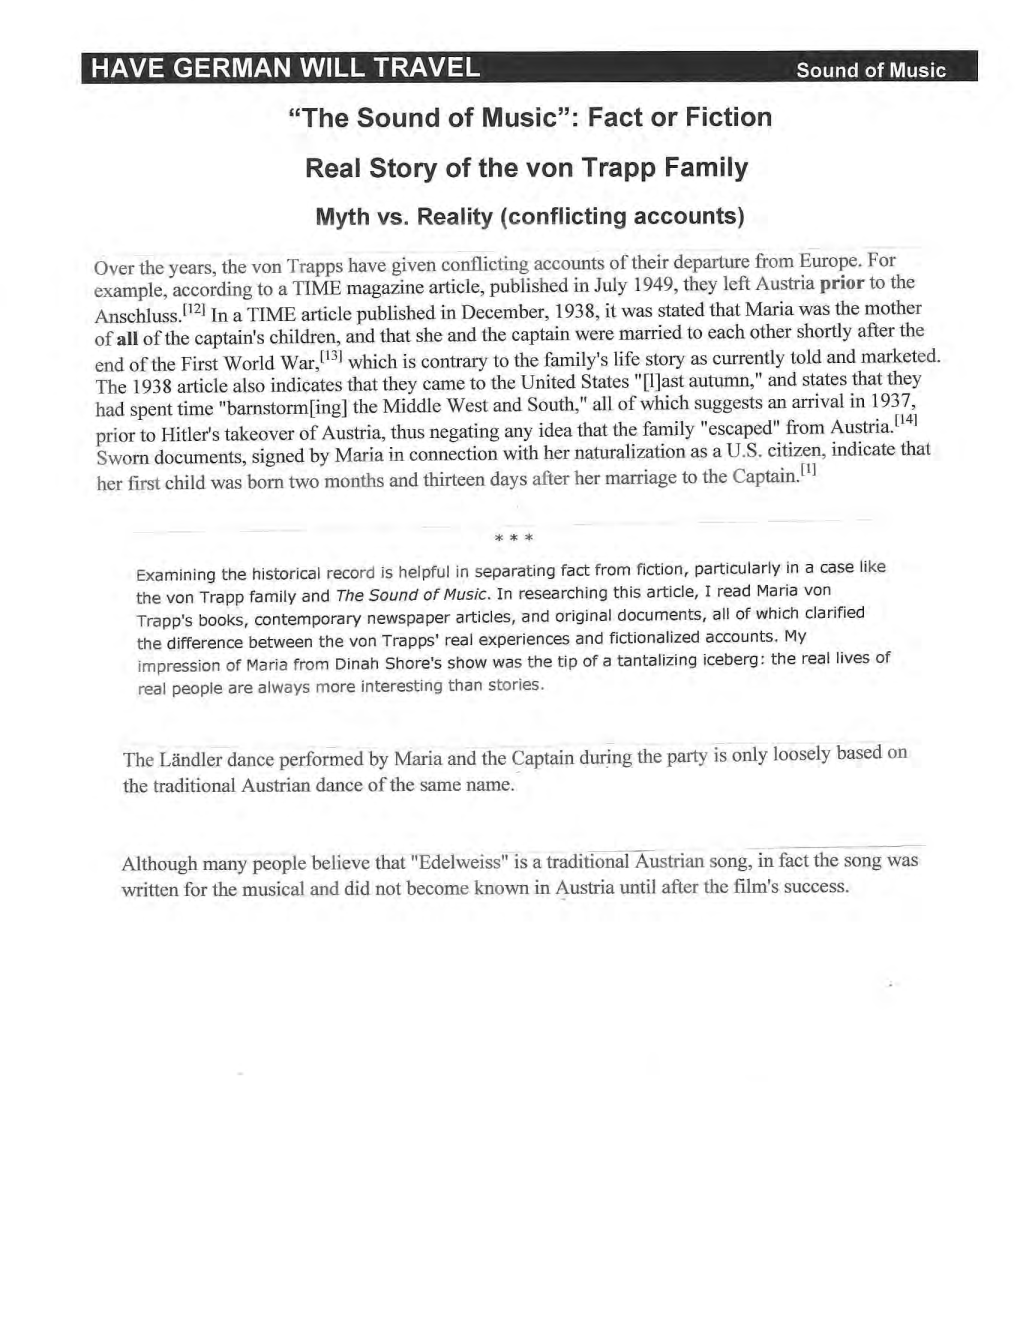 "The Sound of Music": Fact Or Fiction Real Story of the Von Trapp Family